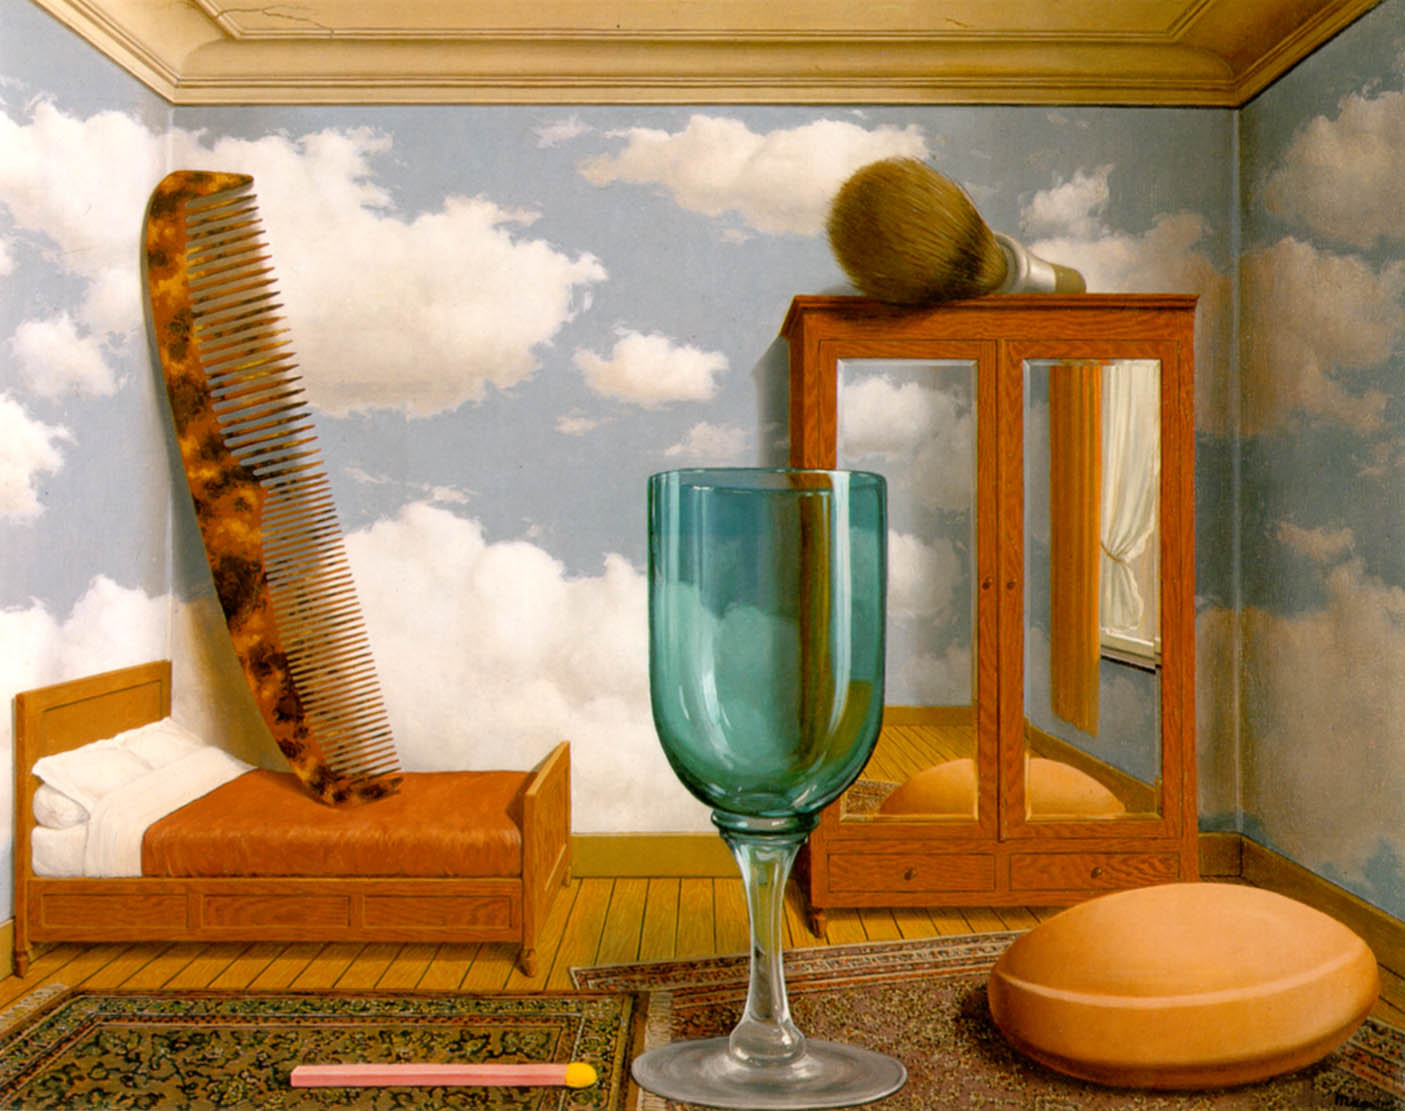 Les Valeurs by Magritte